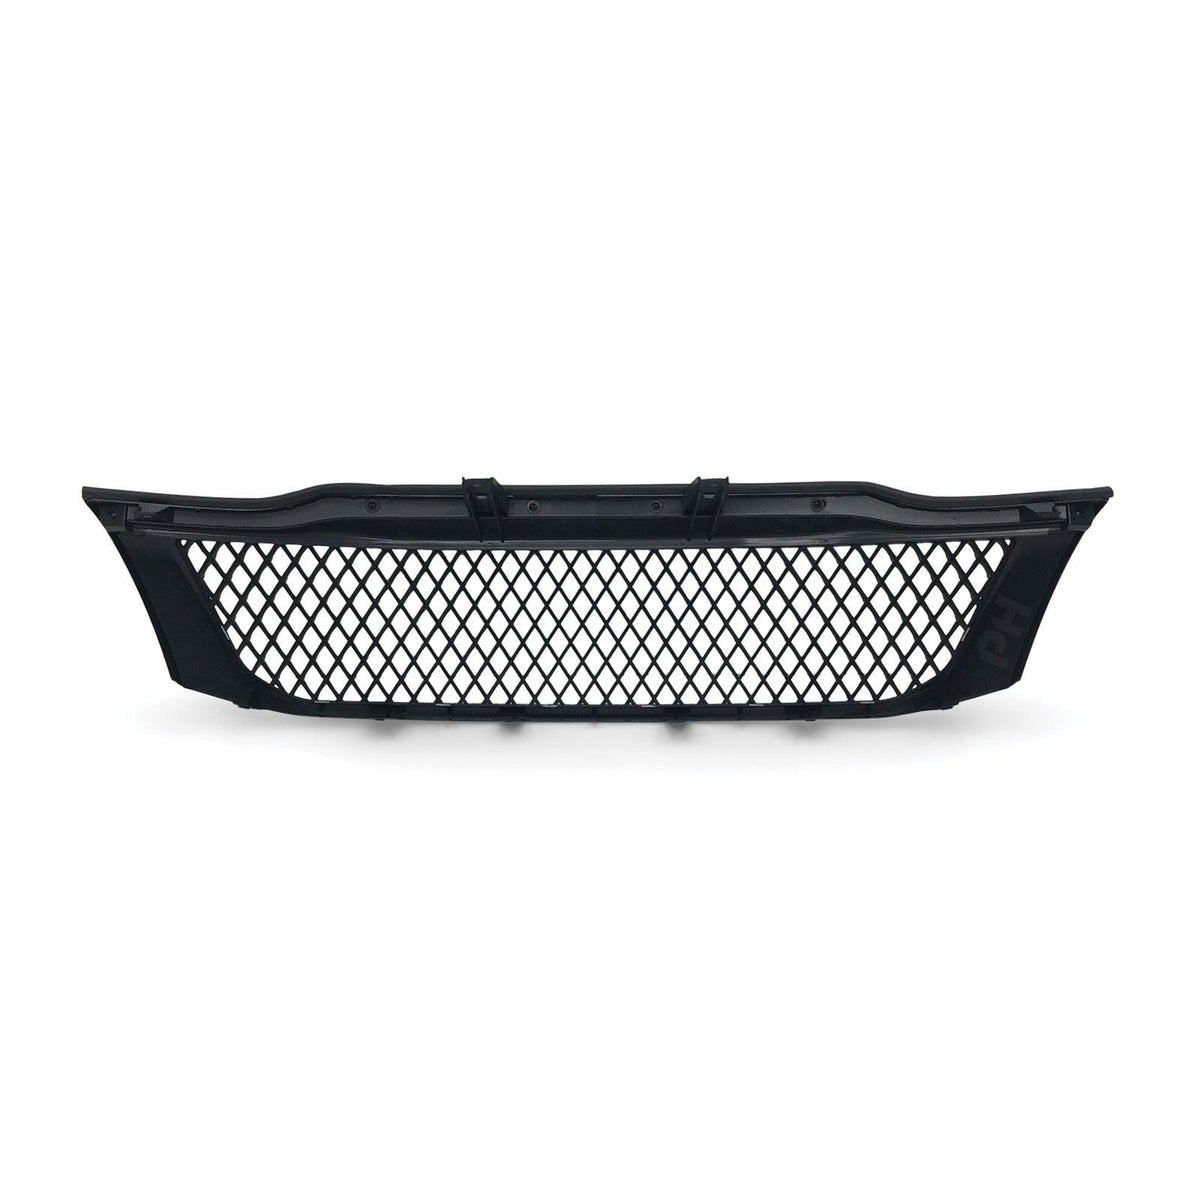 Grill Bentley Style BLACK Edition Fits Toyota Hilux N70 2011-2014 SR5 Workmate - 4X4OC™